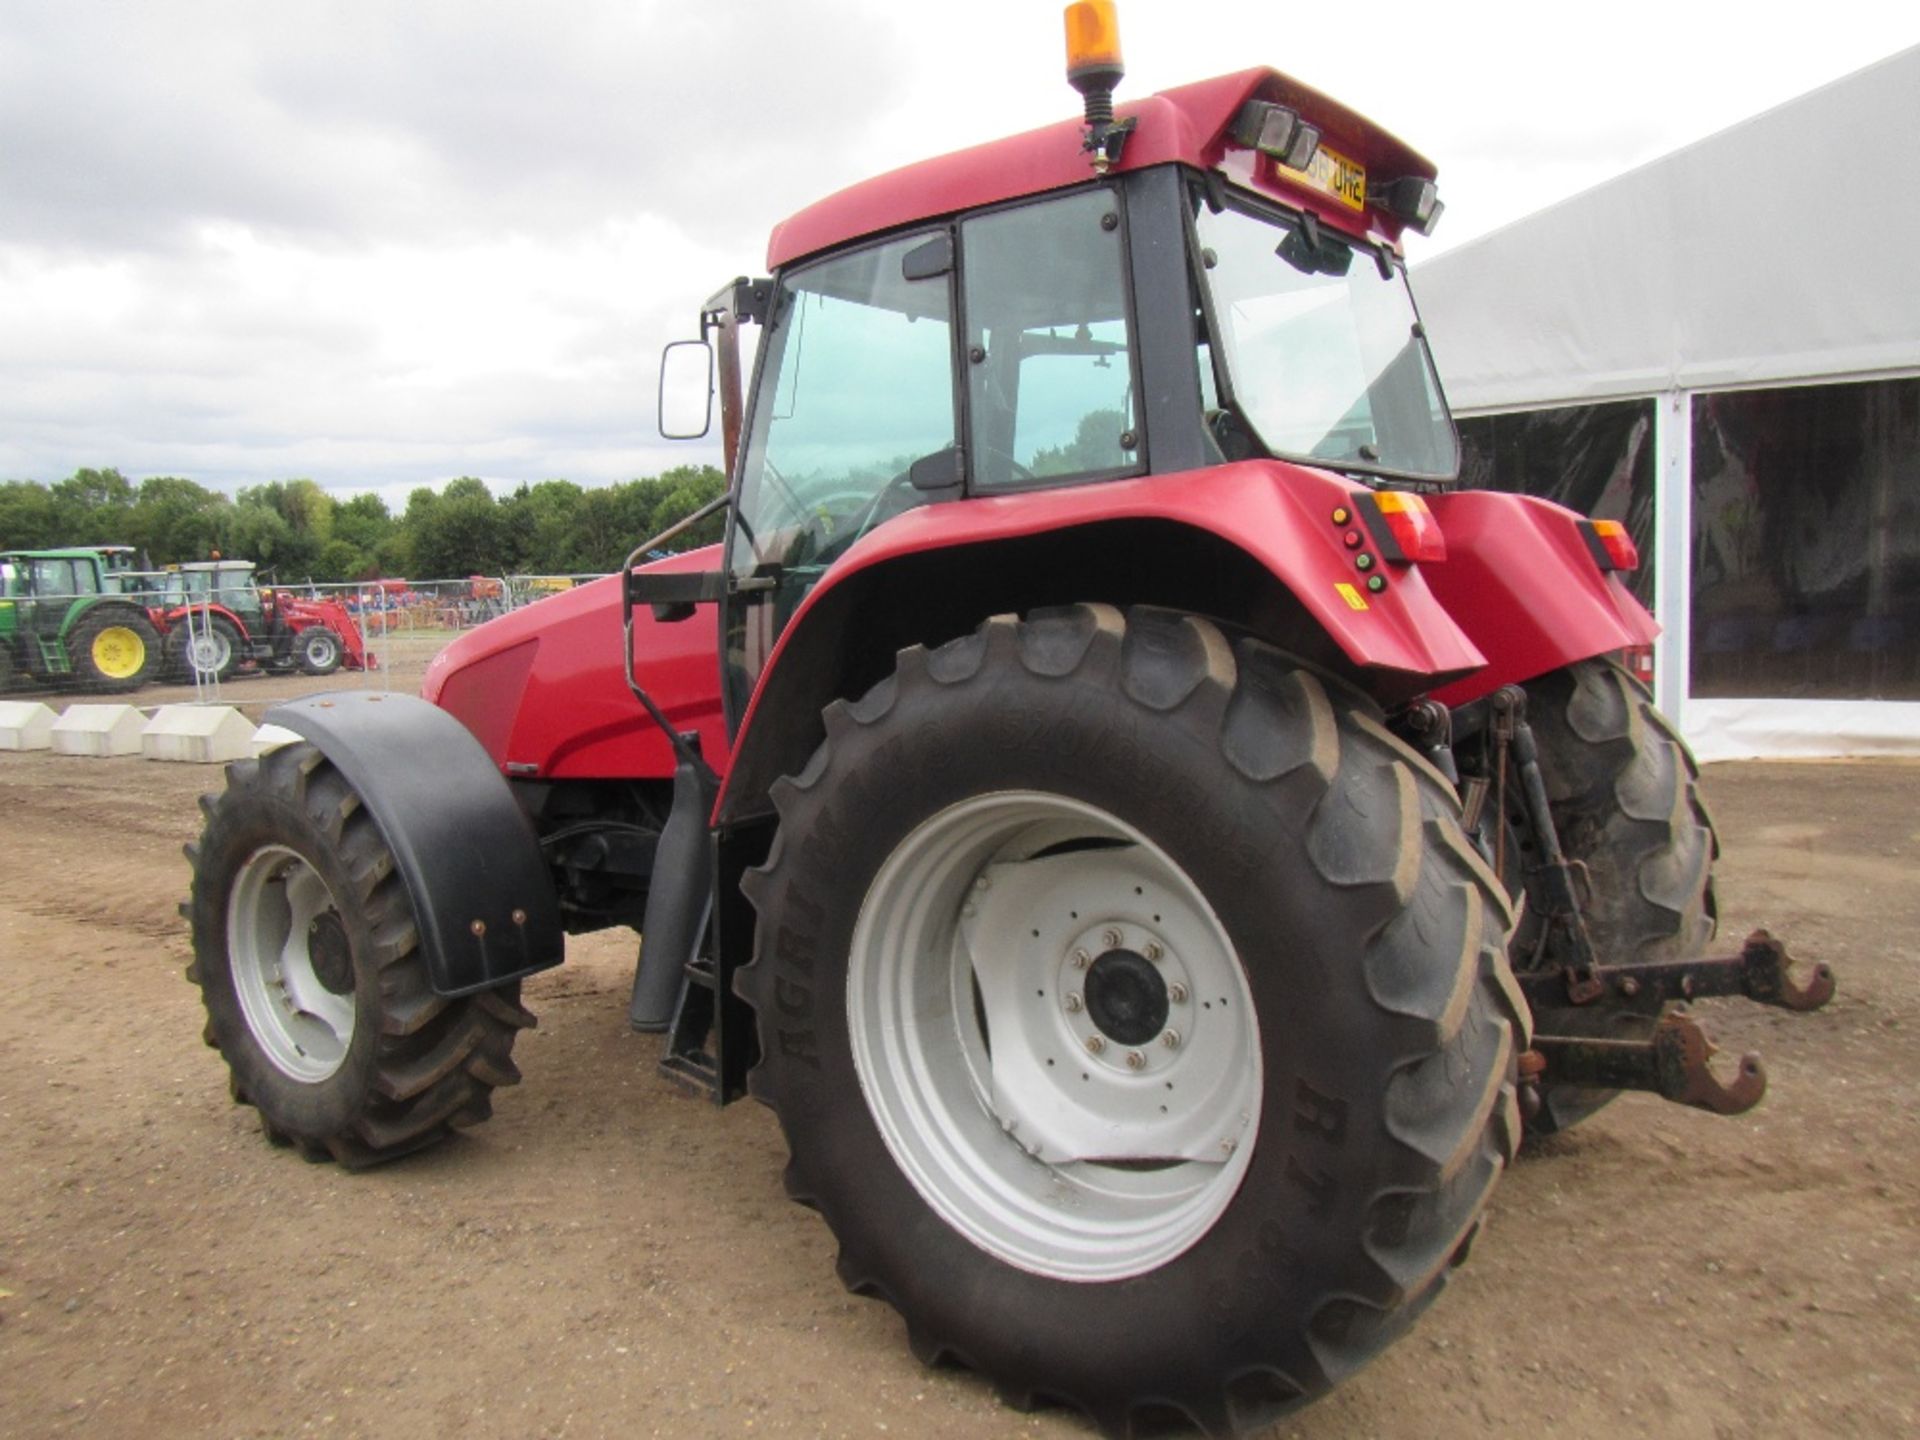 1998 Case CS150 Tractor 6700 hrs. Reg. No. R398 UHE - Image 10 of 17